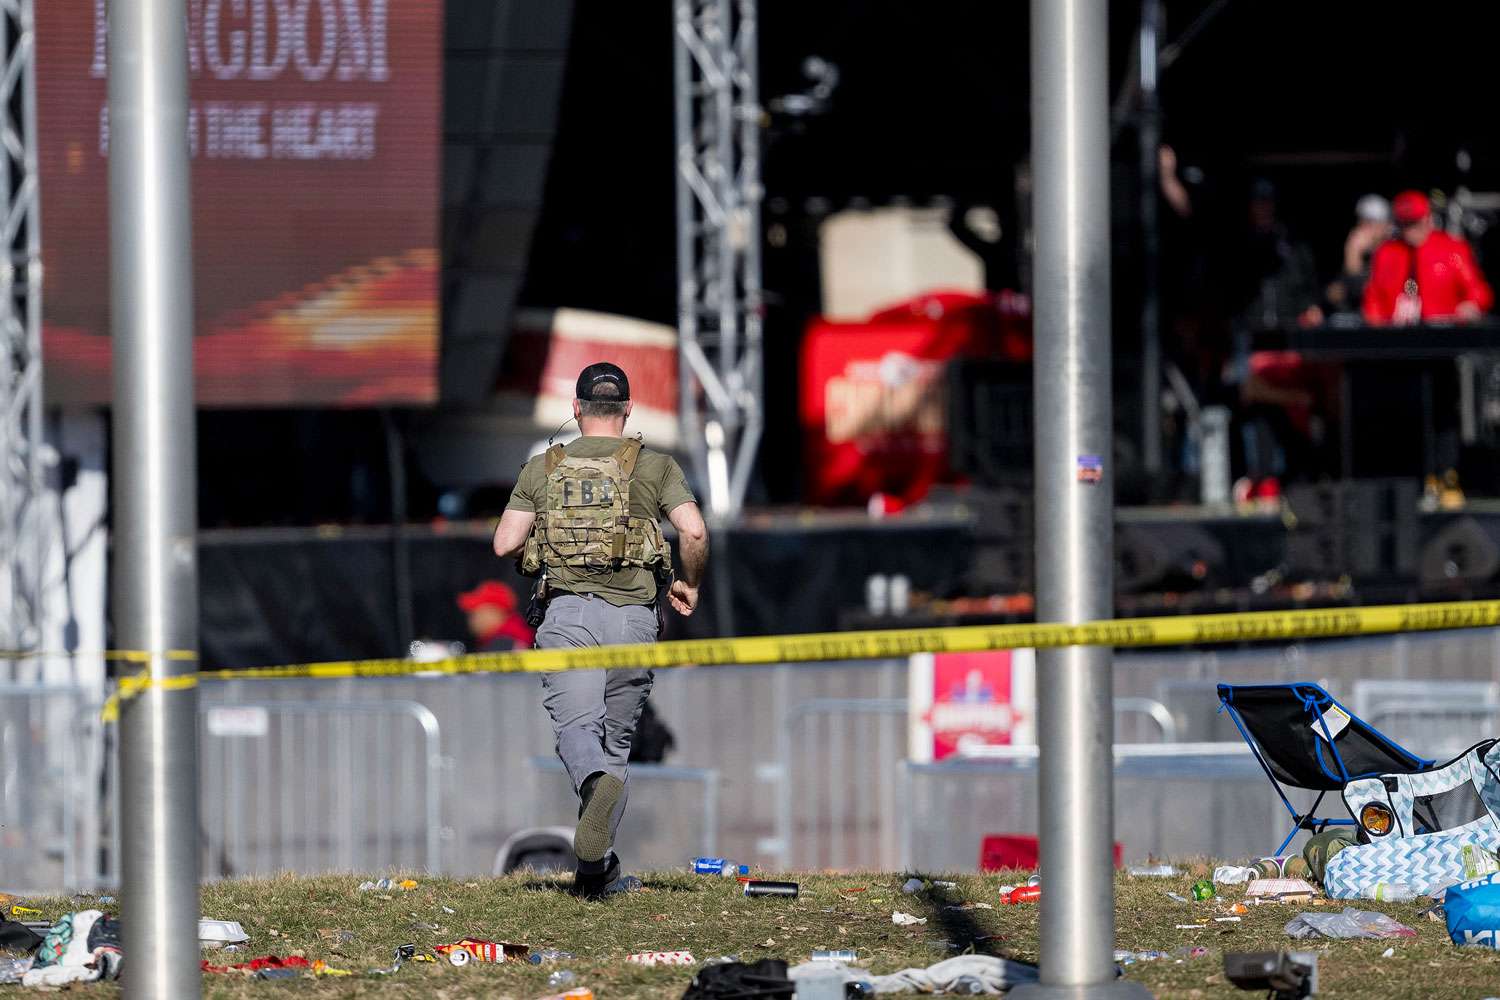 Chiefs Parade Shooting: Police Rule Out Terrorism, Cite Dispute Between Individuals